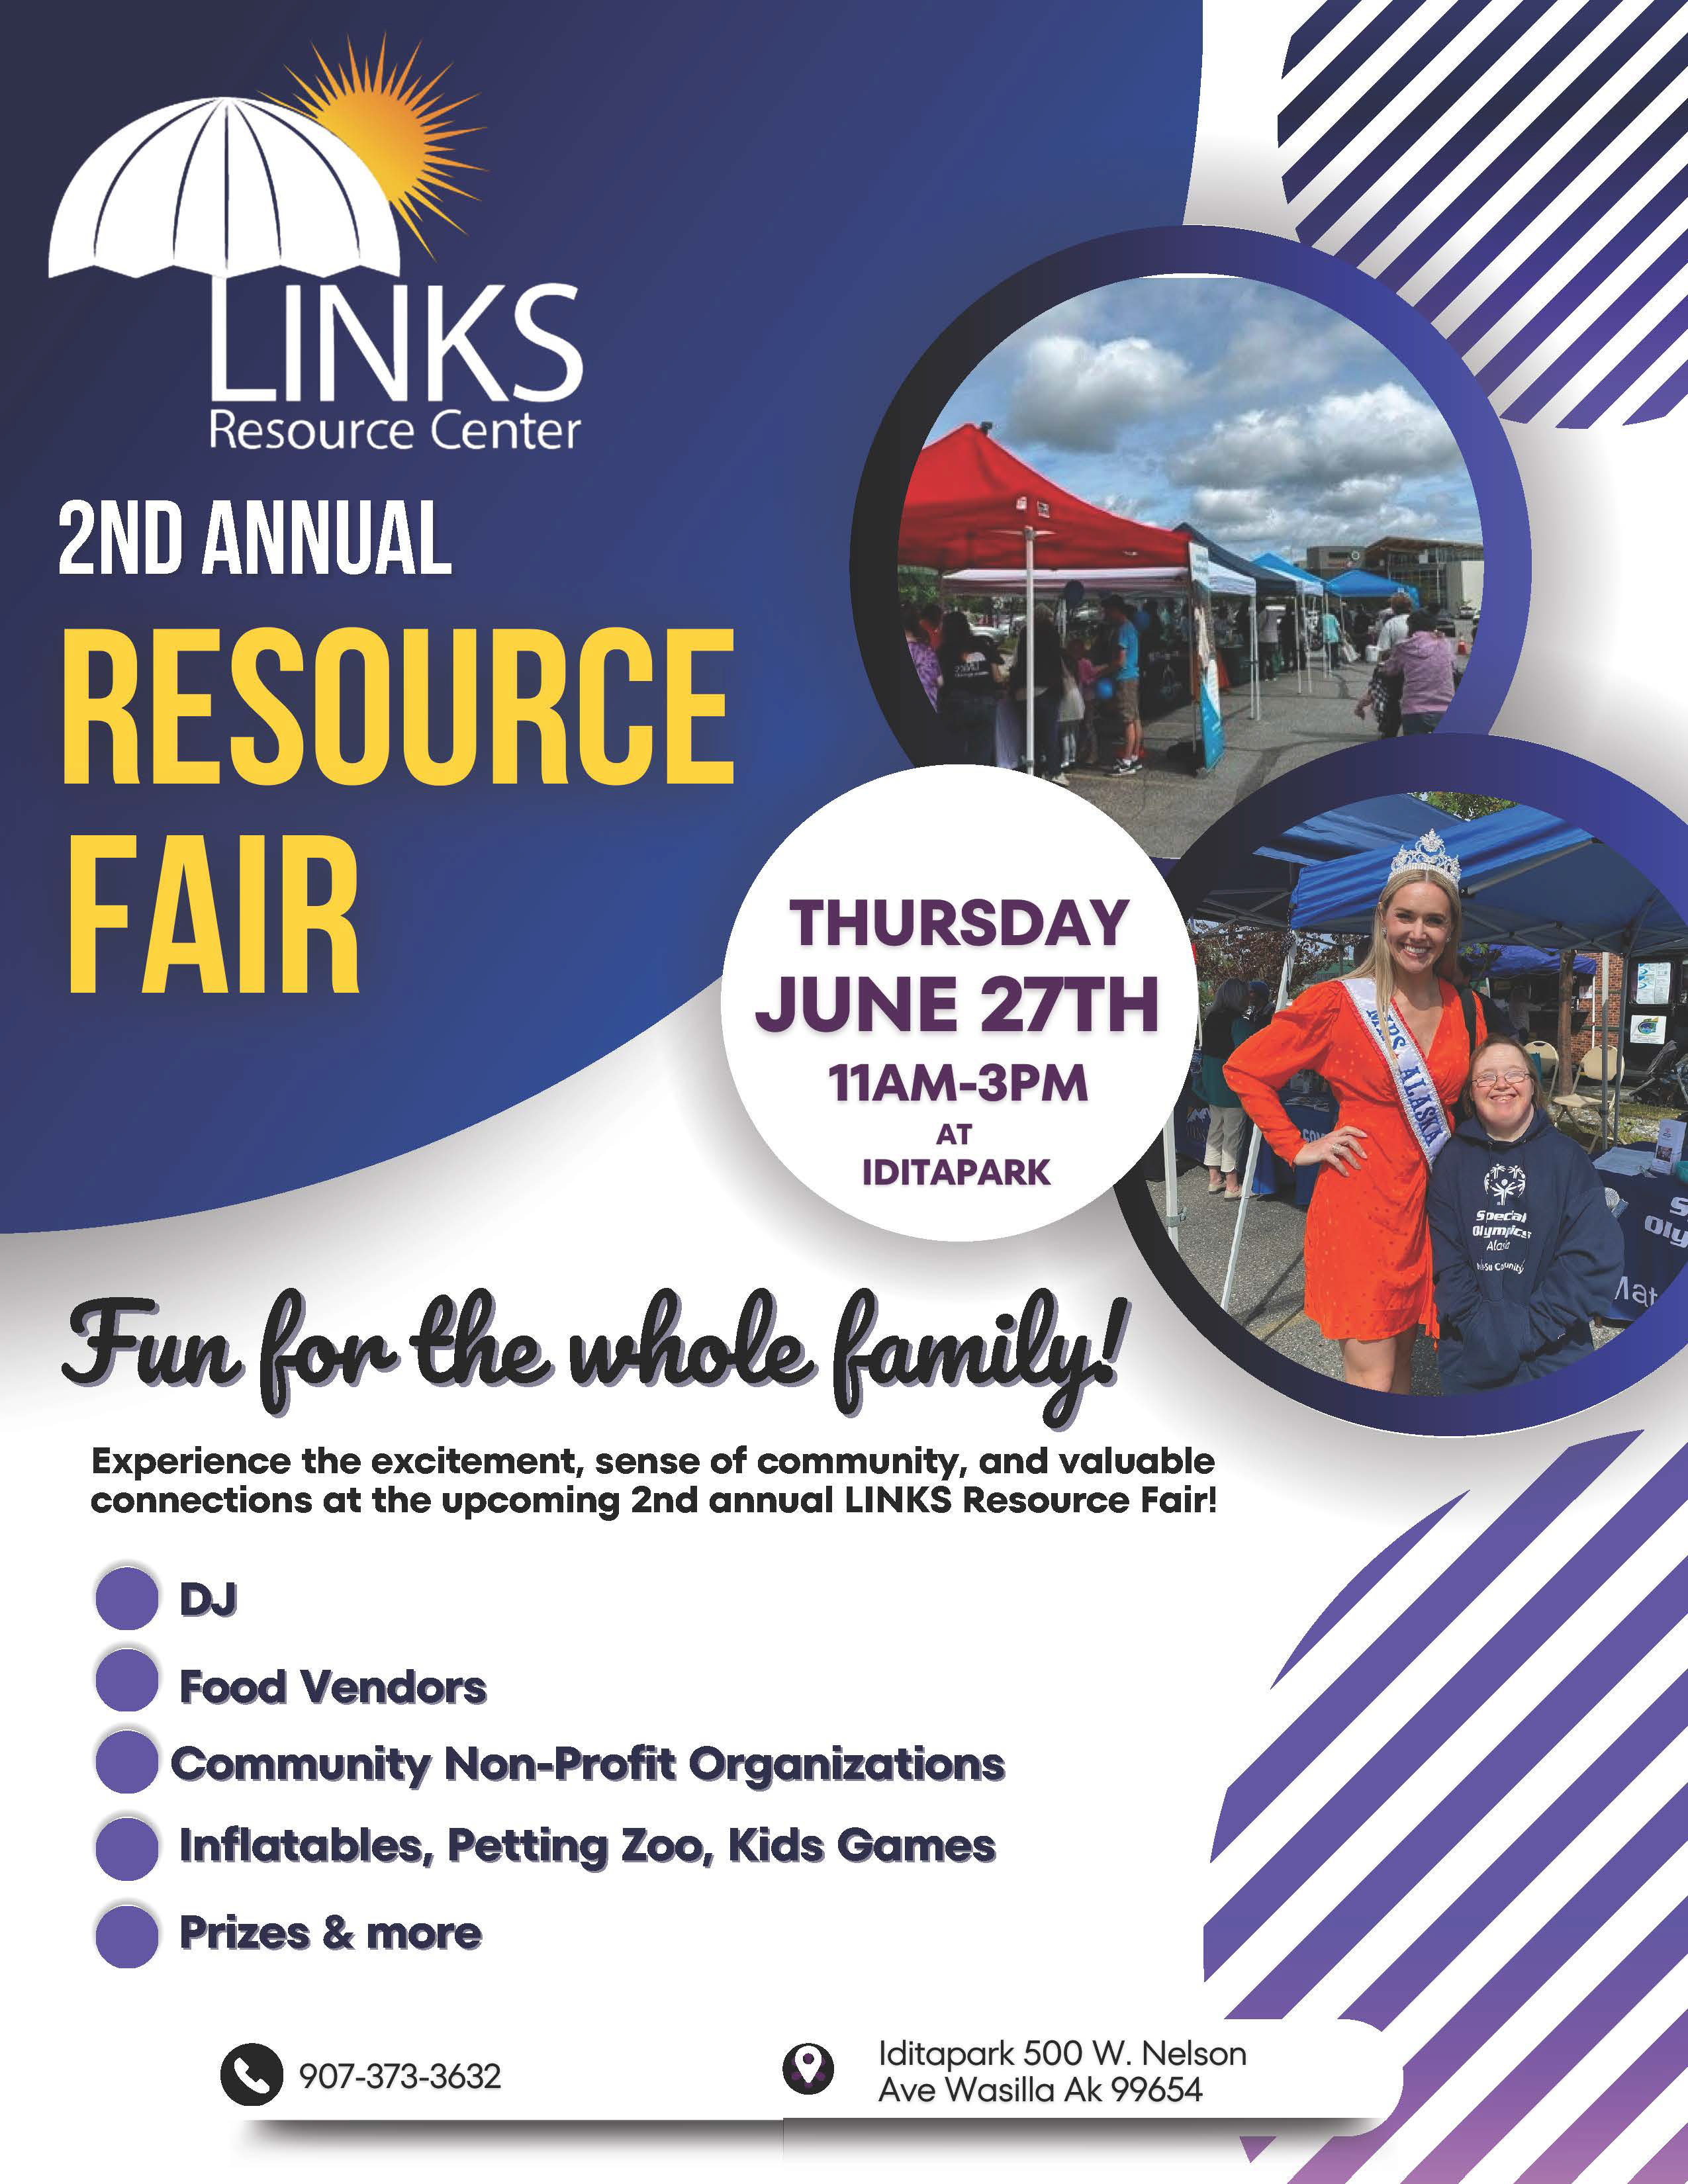 LINKS 2nd Annual Resource Fair Event